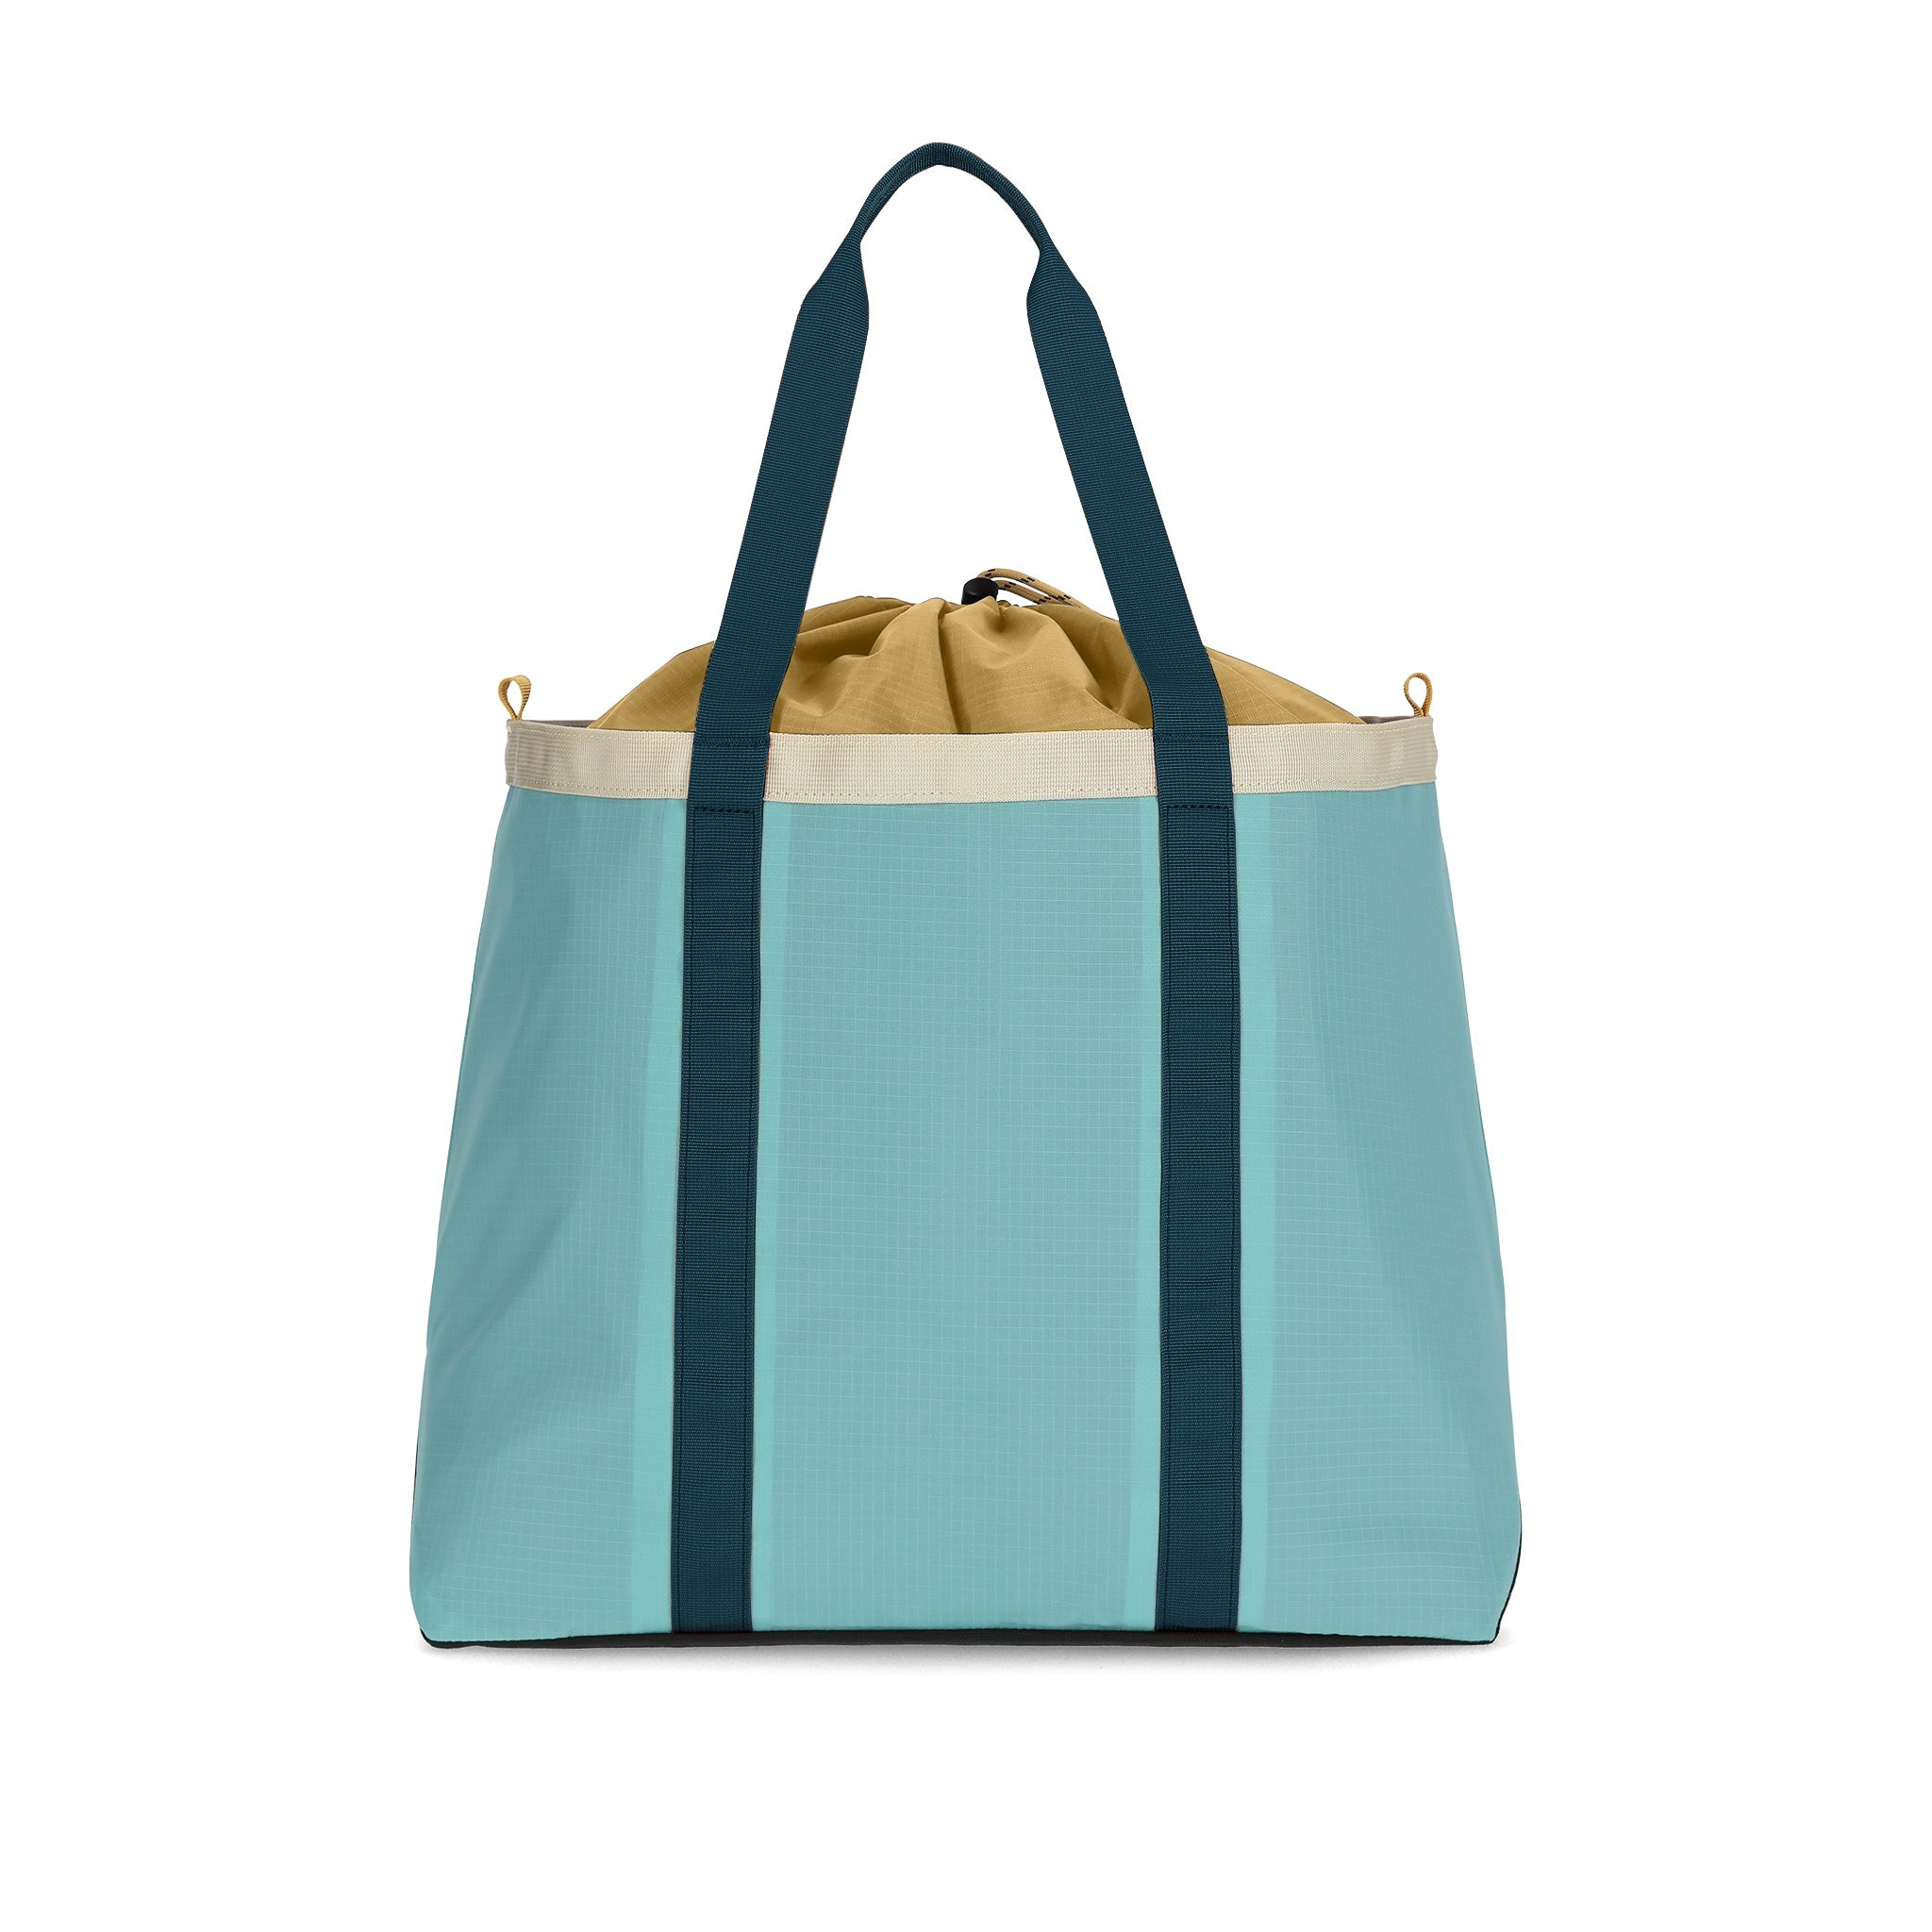 Back View of Topo Designs Mountain Utility Tote in "Geode Green / Sea Pine"